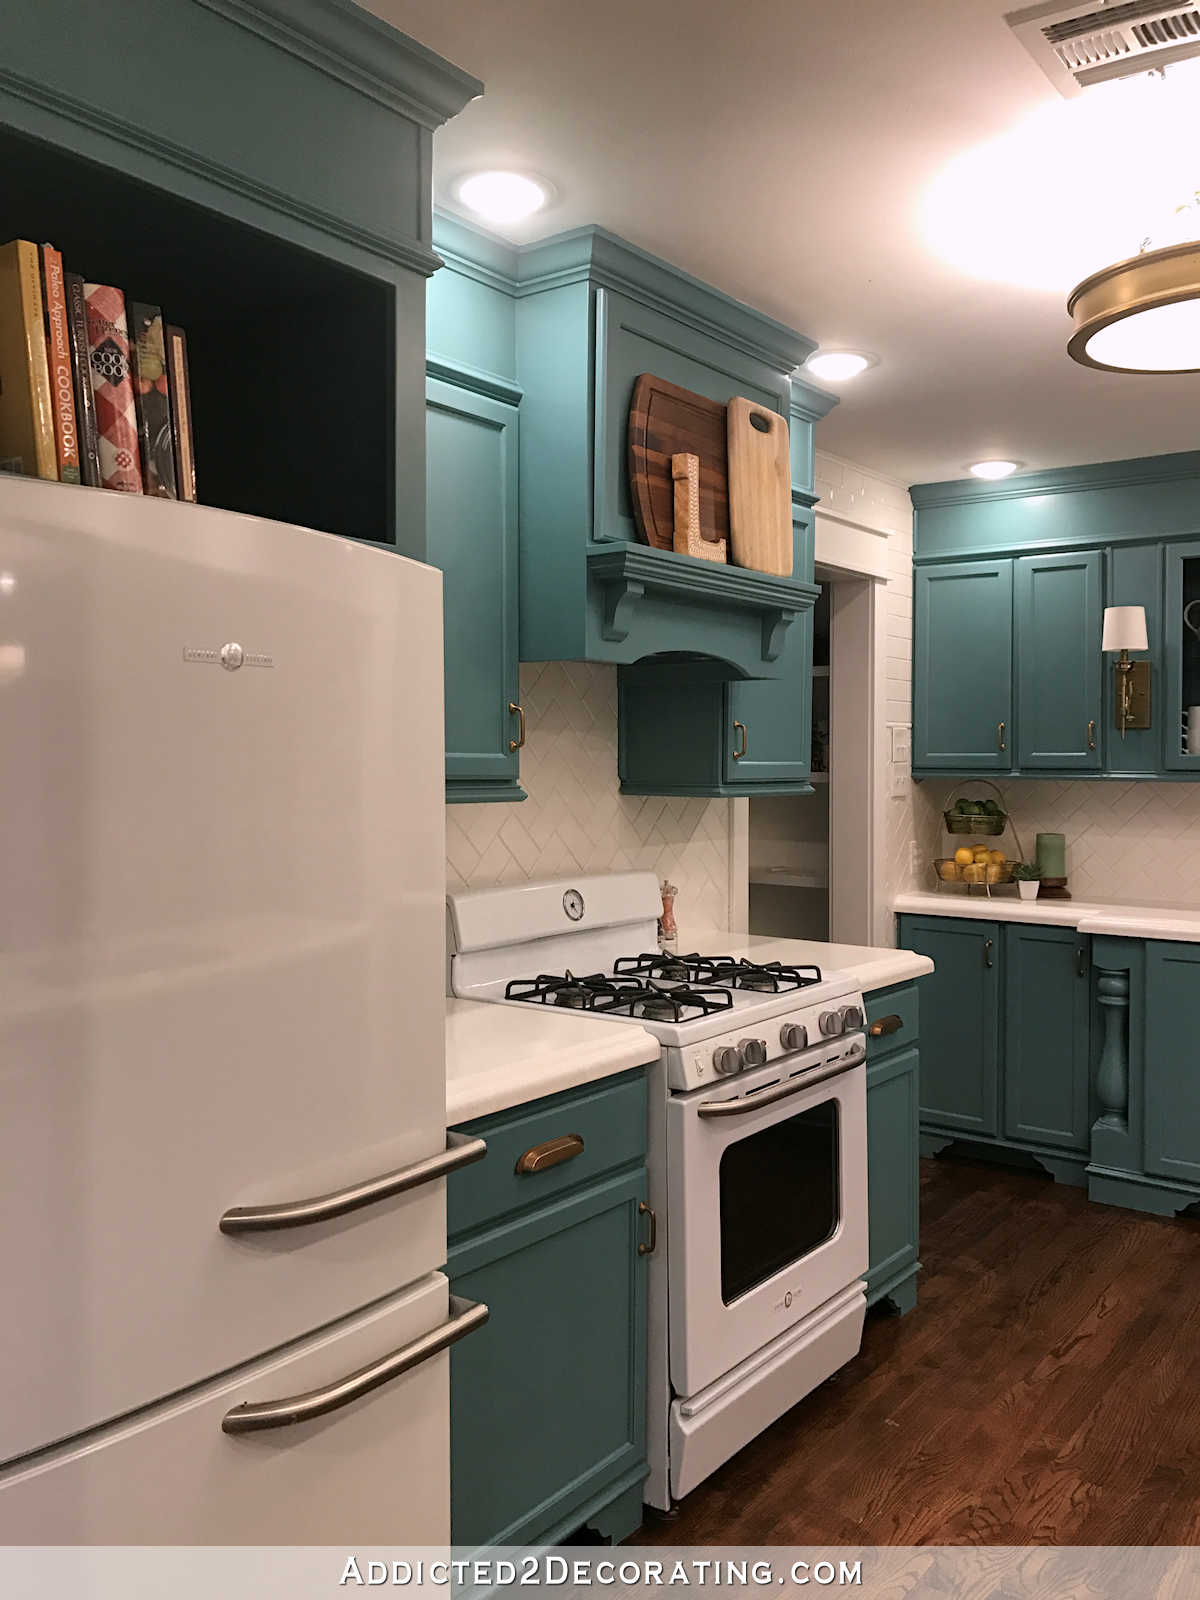 teal kitchen - range and refrigerator wall from the living room doorway